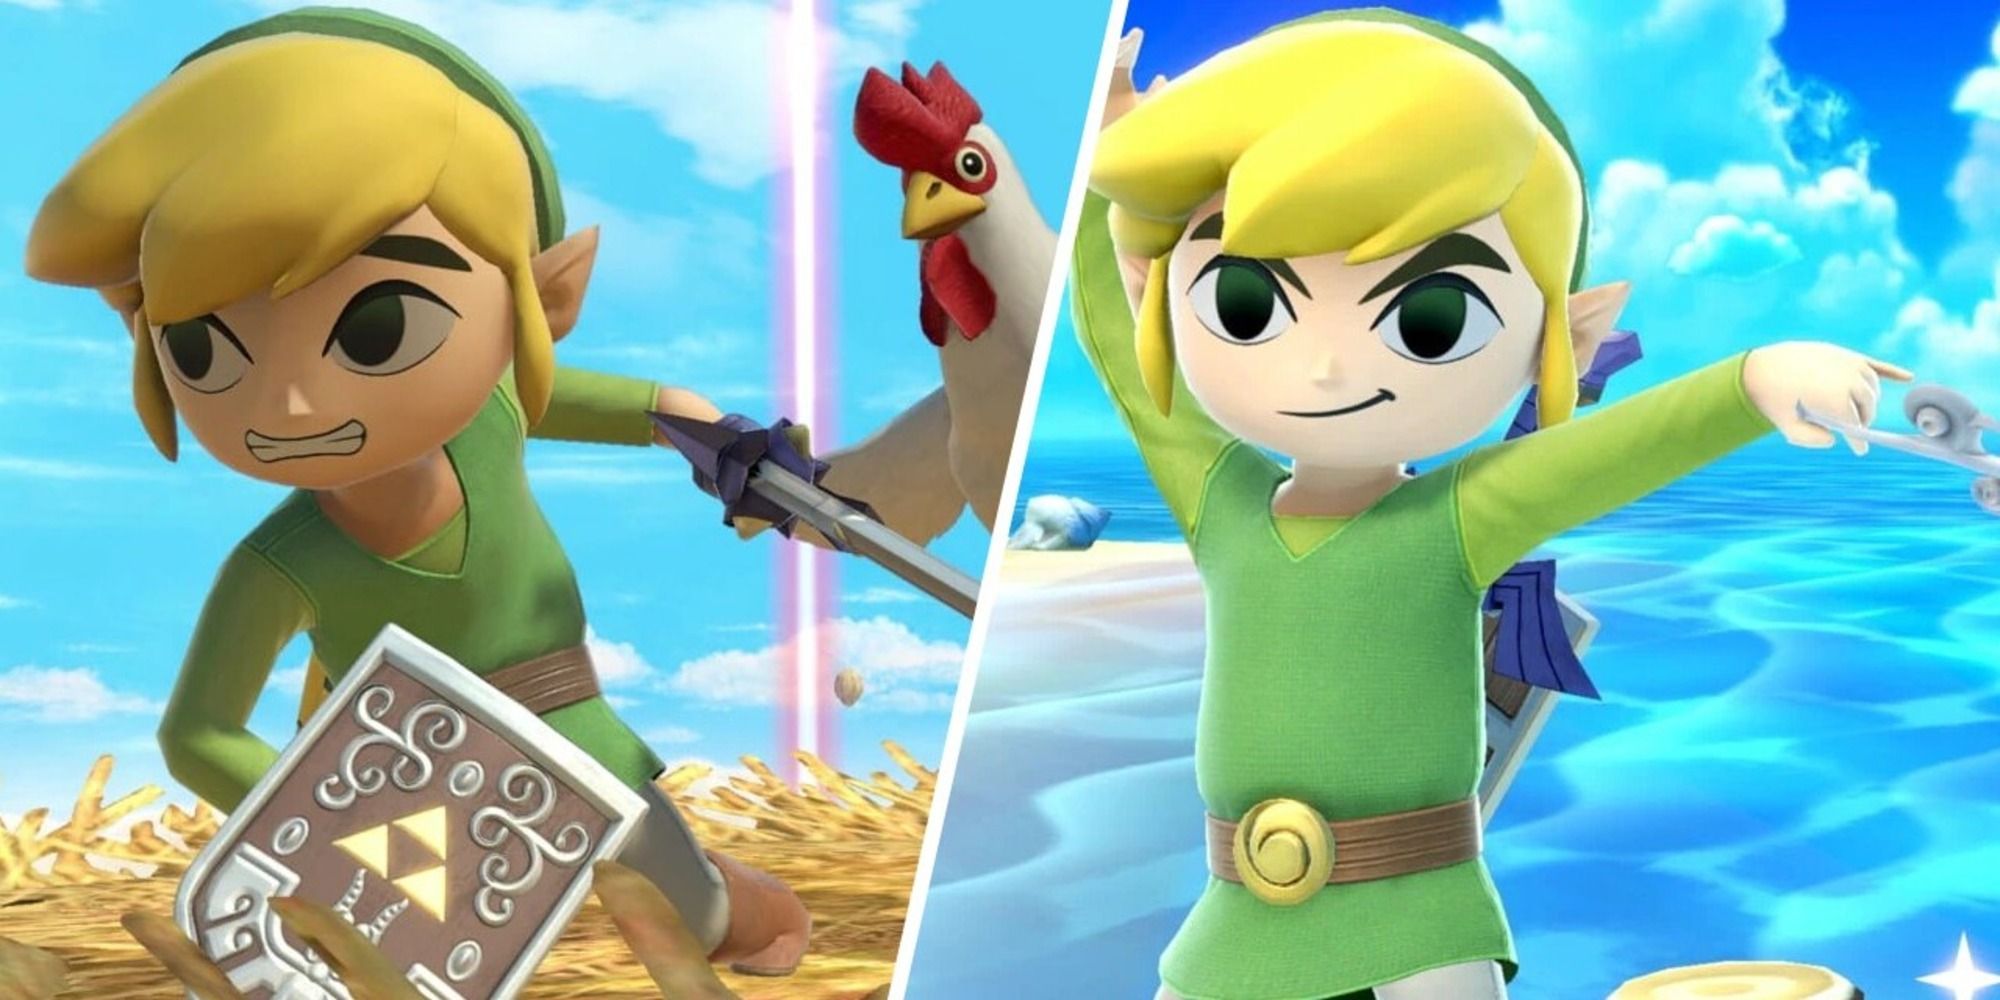 Toon Link with a Cucco and using one of his taunts in Super Smash Bros. Ultimate.